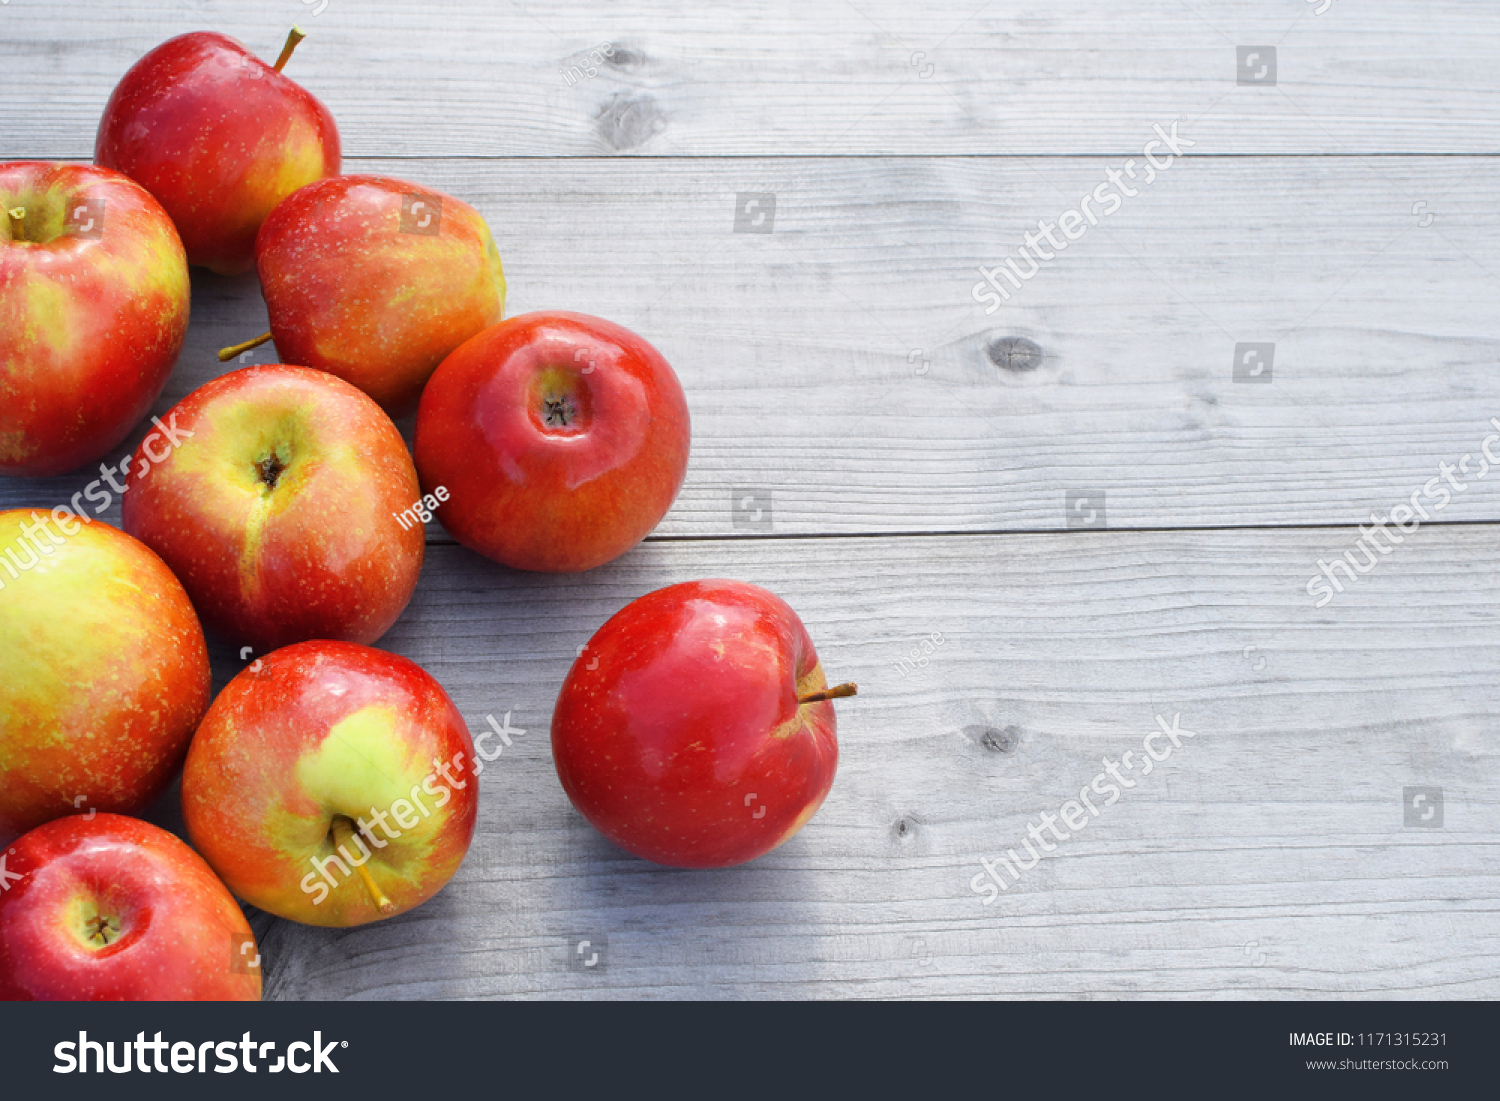 Red fresh shiny apples on grey weathered wooden table background with copy space for text. Freshly harvested sweet tasty fruit as healthy snack or prepare for delicious salad cooking or bakery.
 #1171315231